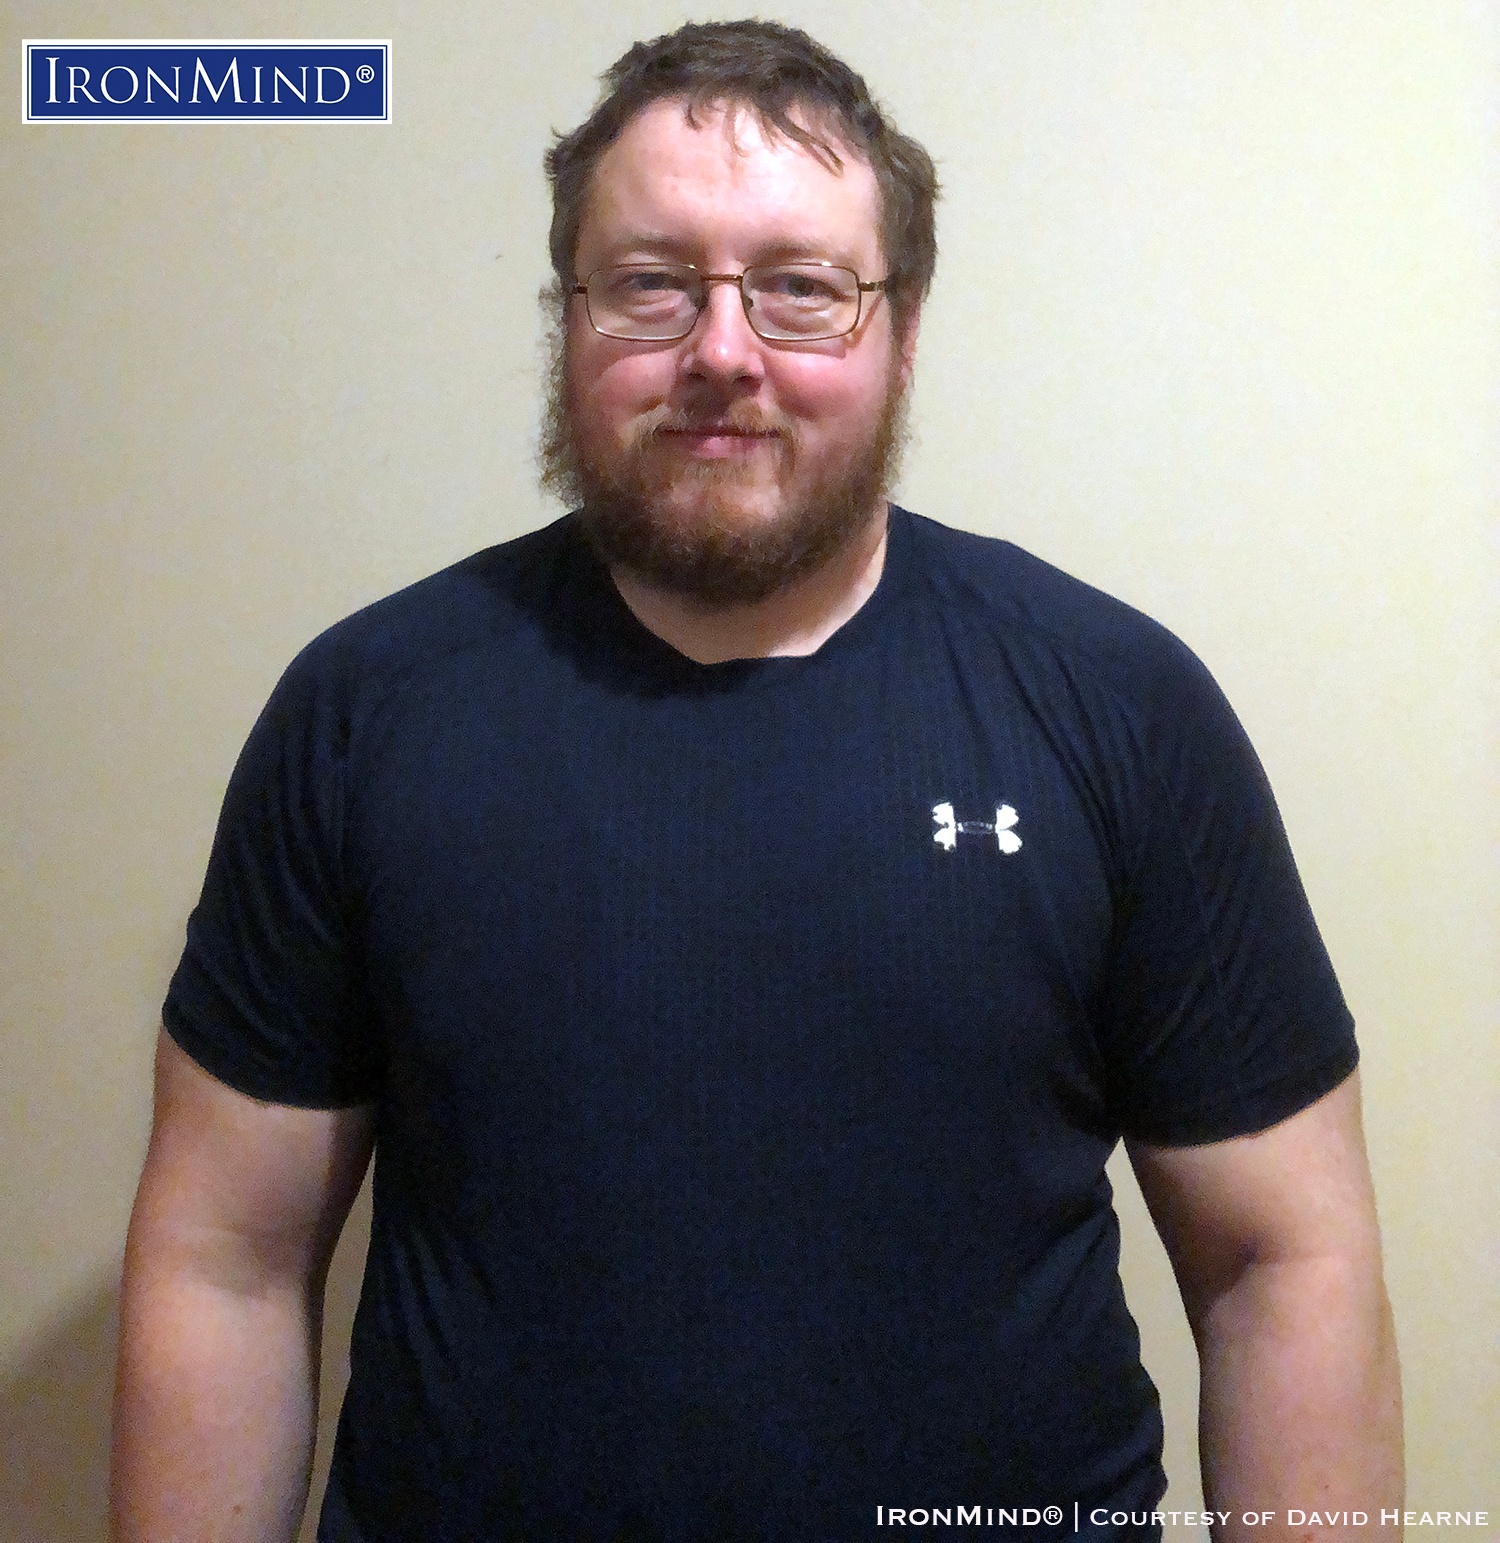 David Hearne (Ireland) has been certified on IronMind’s Crushed-To-Dust! Challenge, proving his outstanding all-around grip strength. David is 38 years old, 5’ 10” tall and weighs about 242 lb. IronMind® | Courtesy of David Hearne